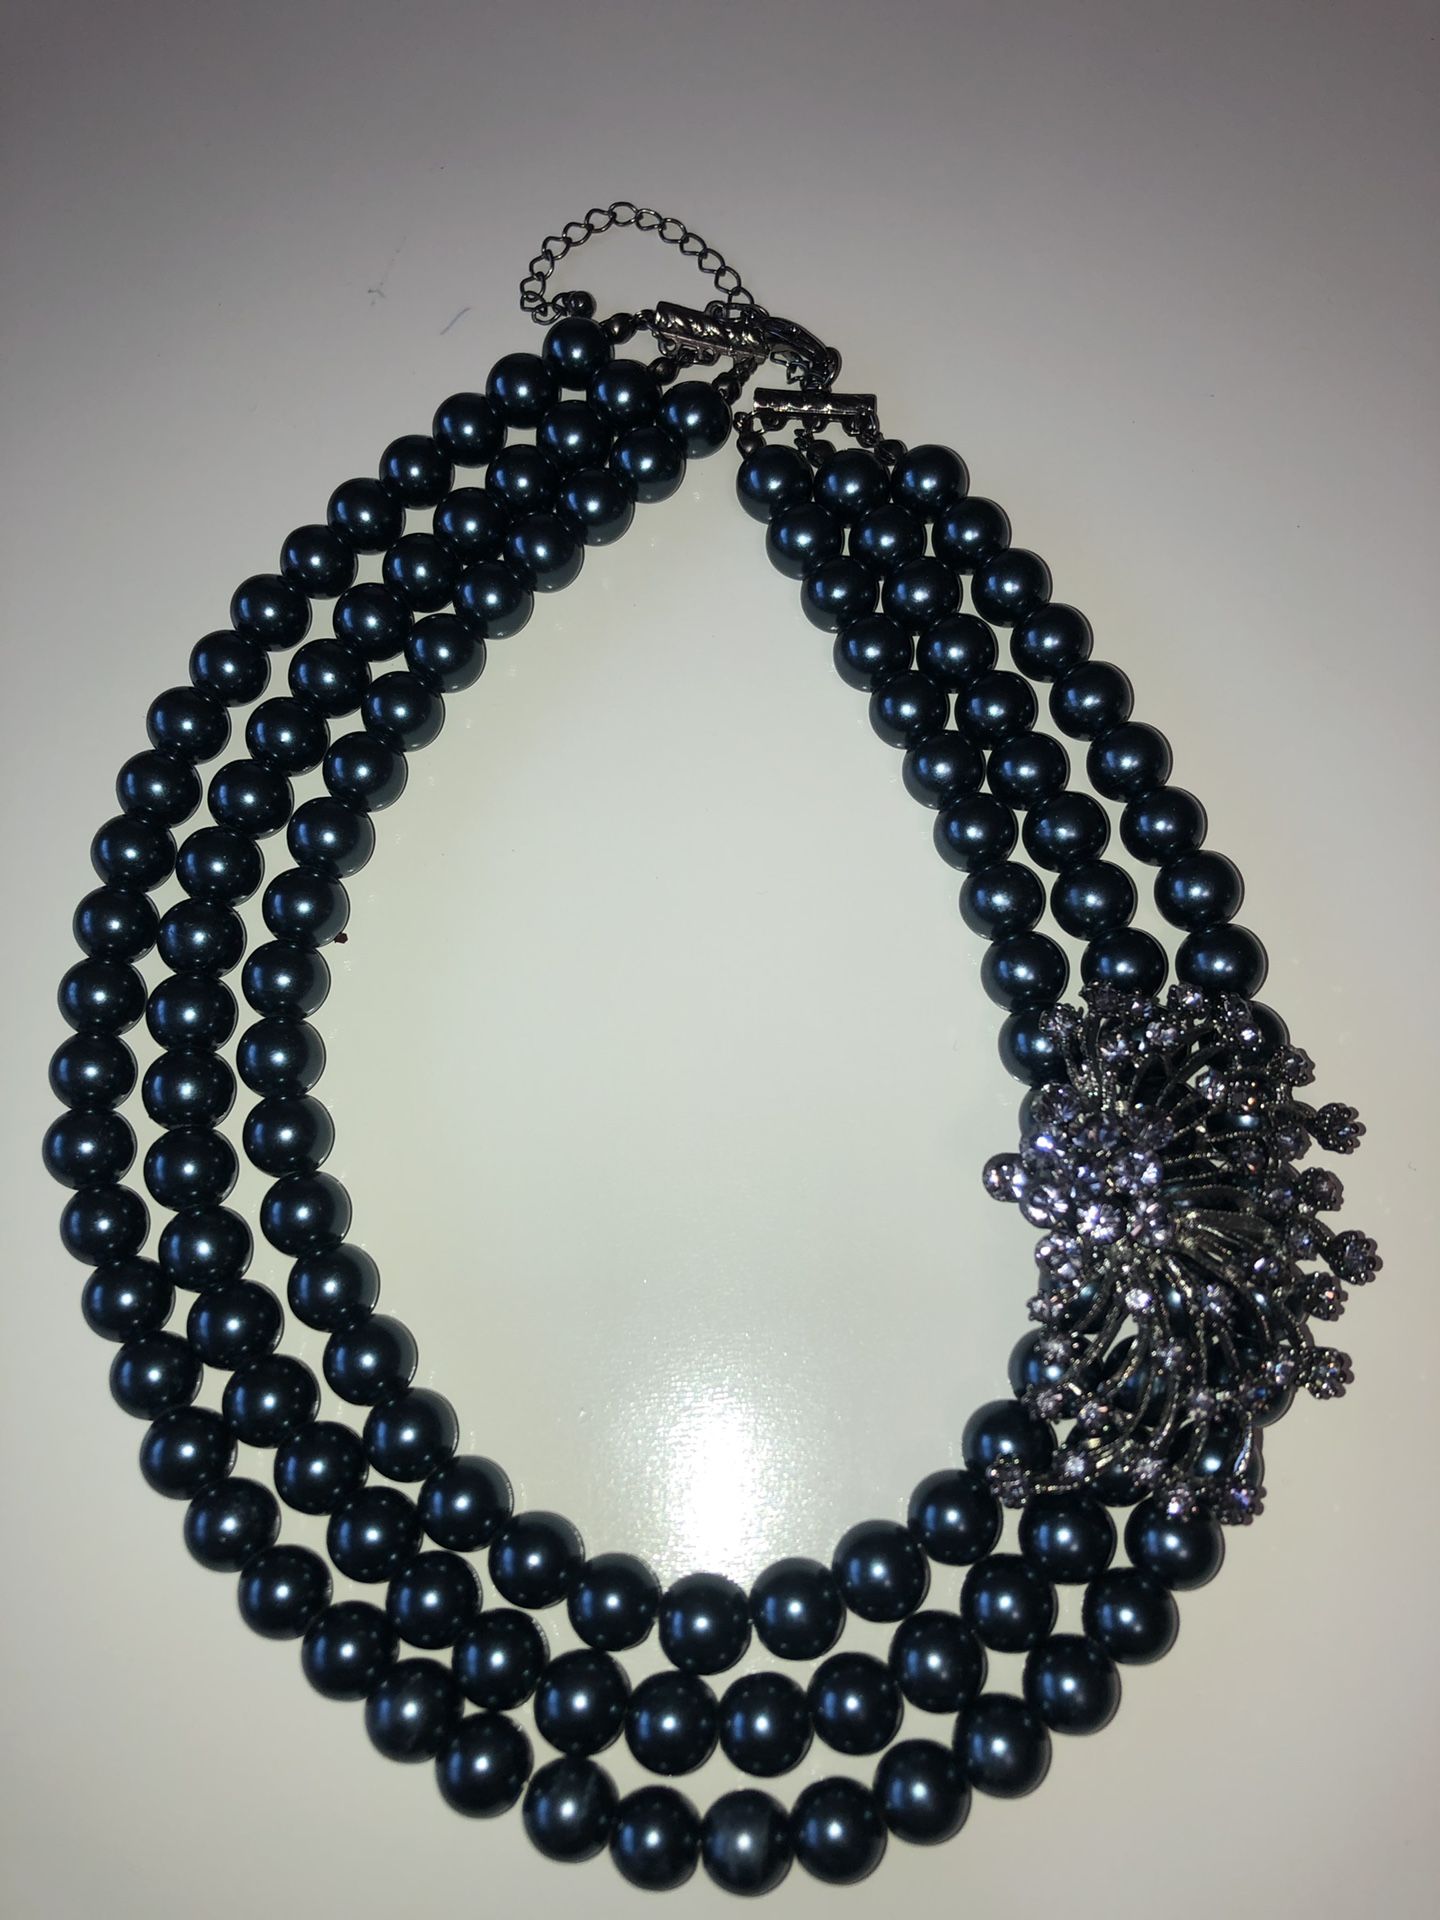 Gunmetal grey pearlesque triple strand necklace with rhinestone accent